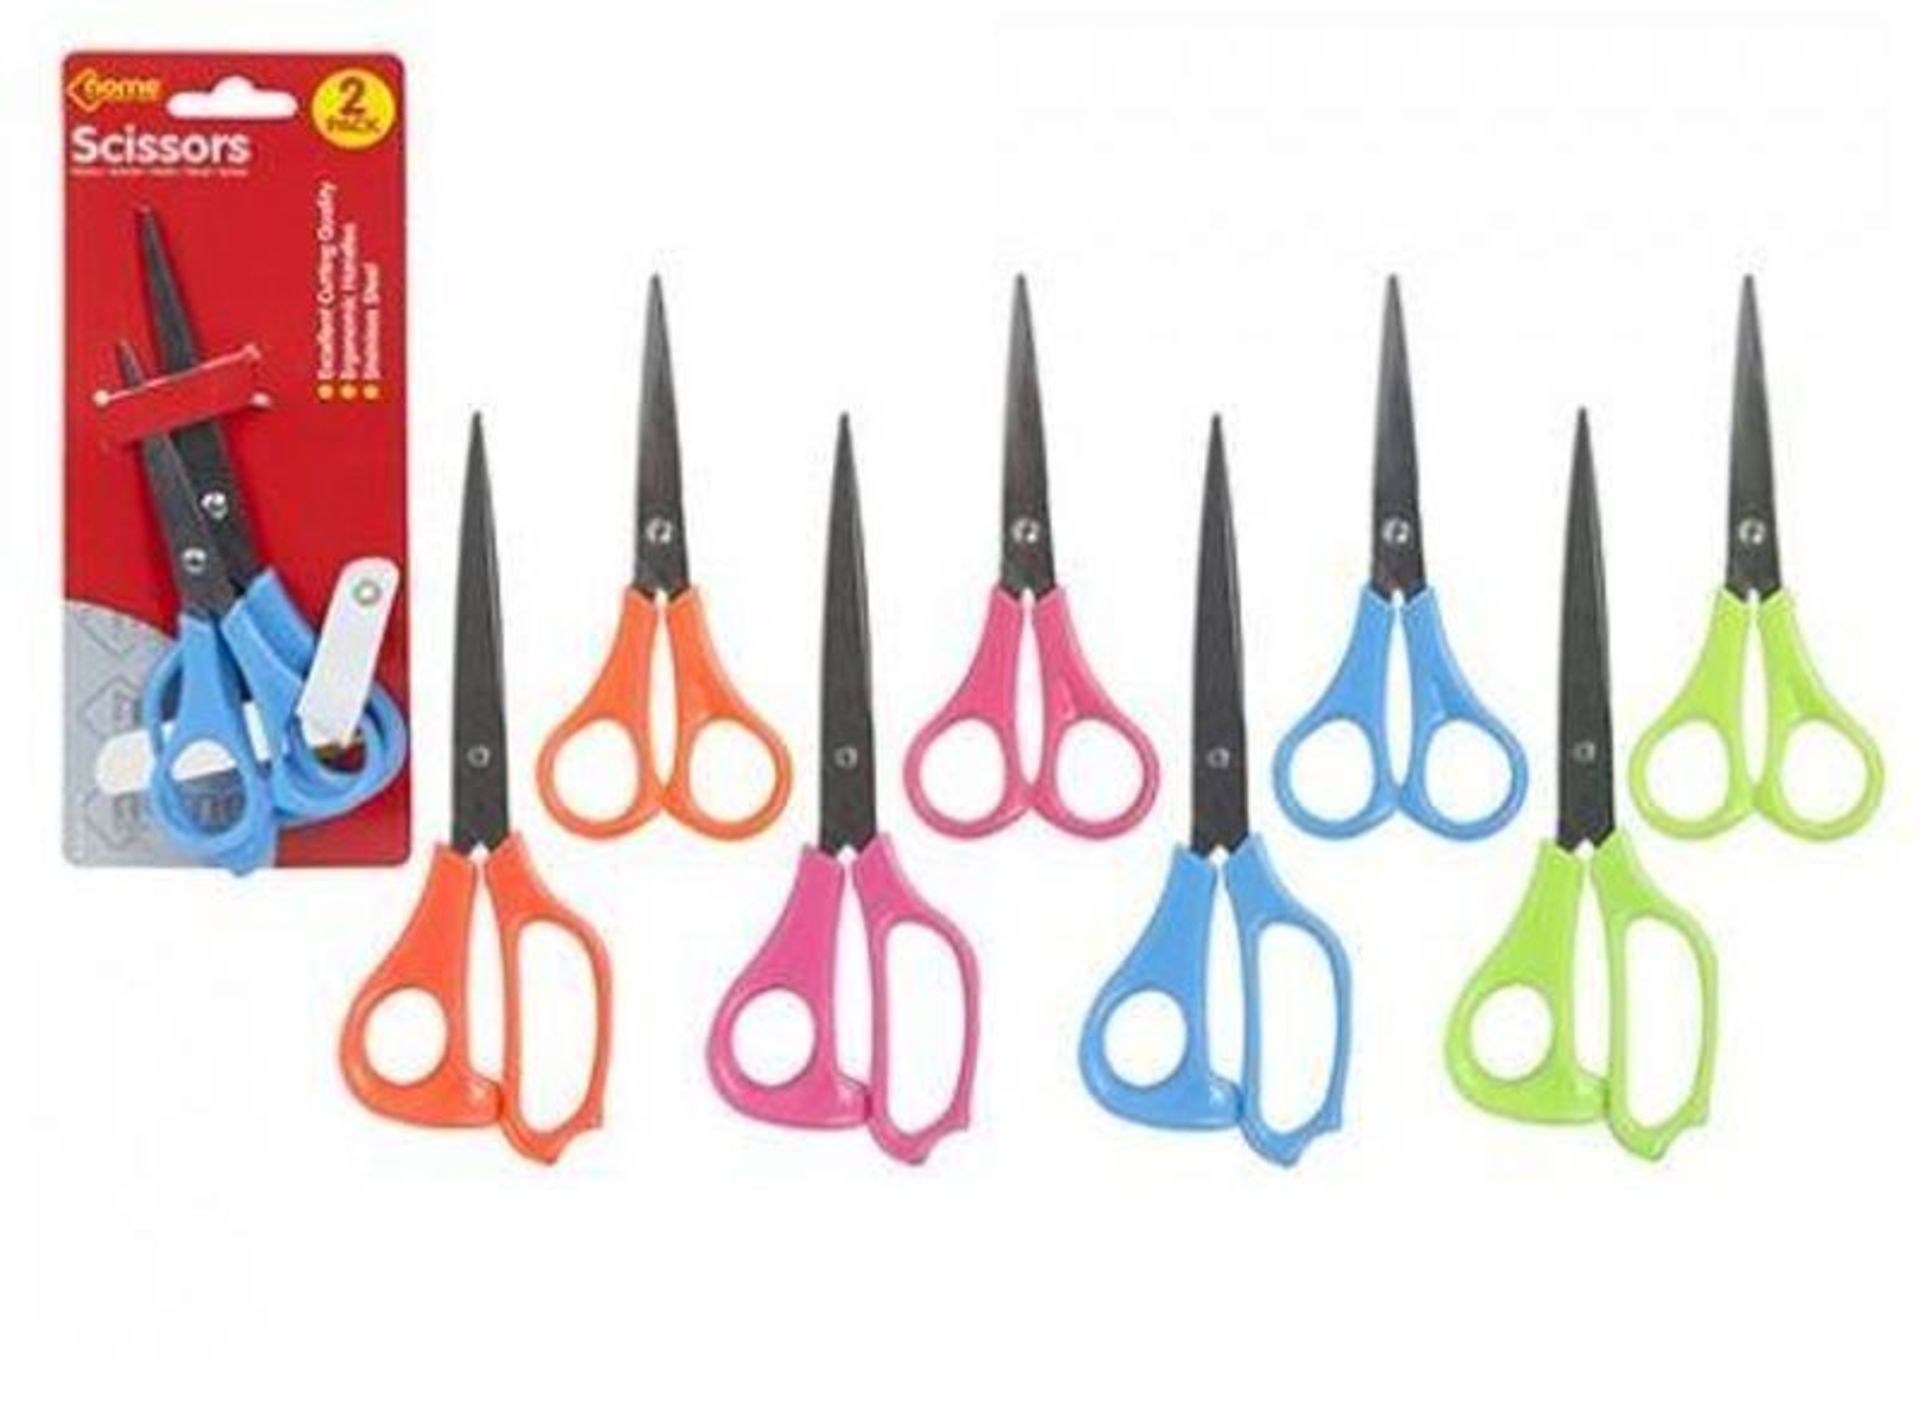 V Brand New Three Packs Of Two Neon Colour Scissors On PVC Coated Backing Card